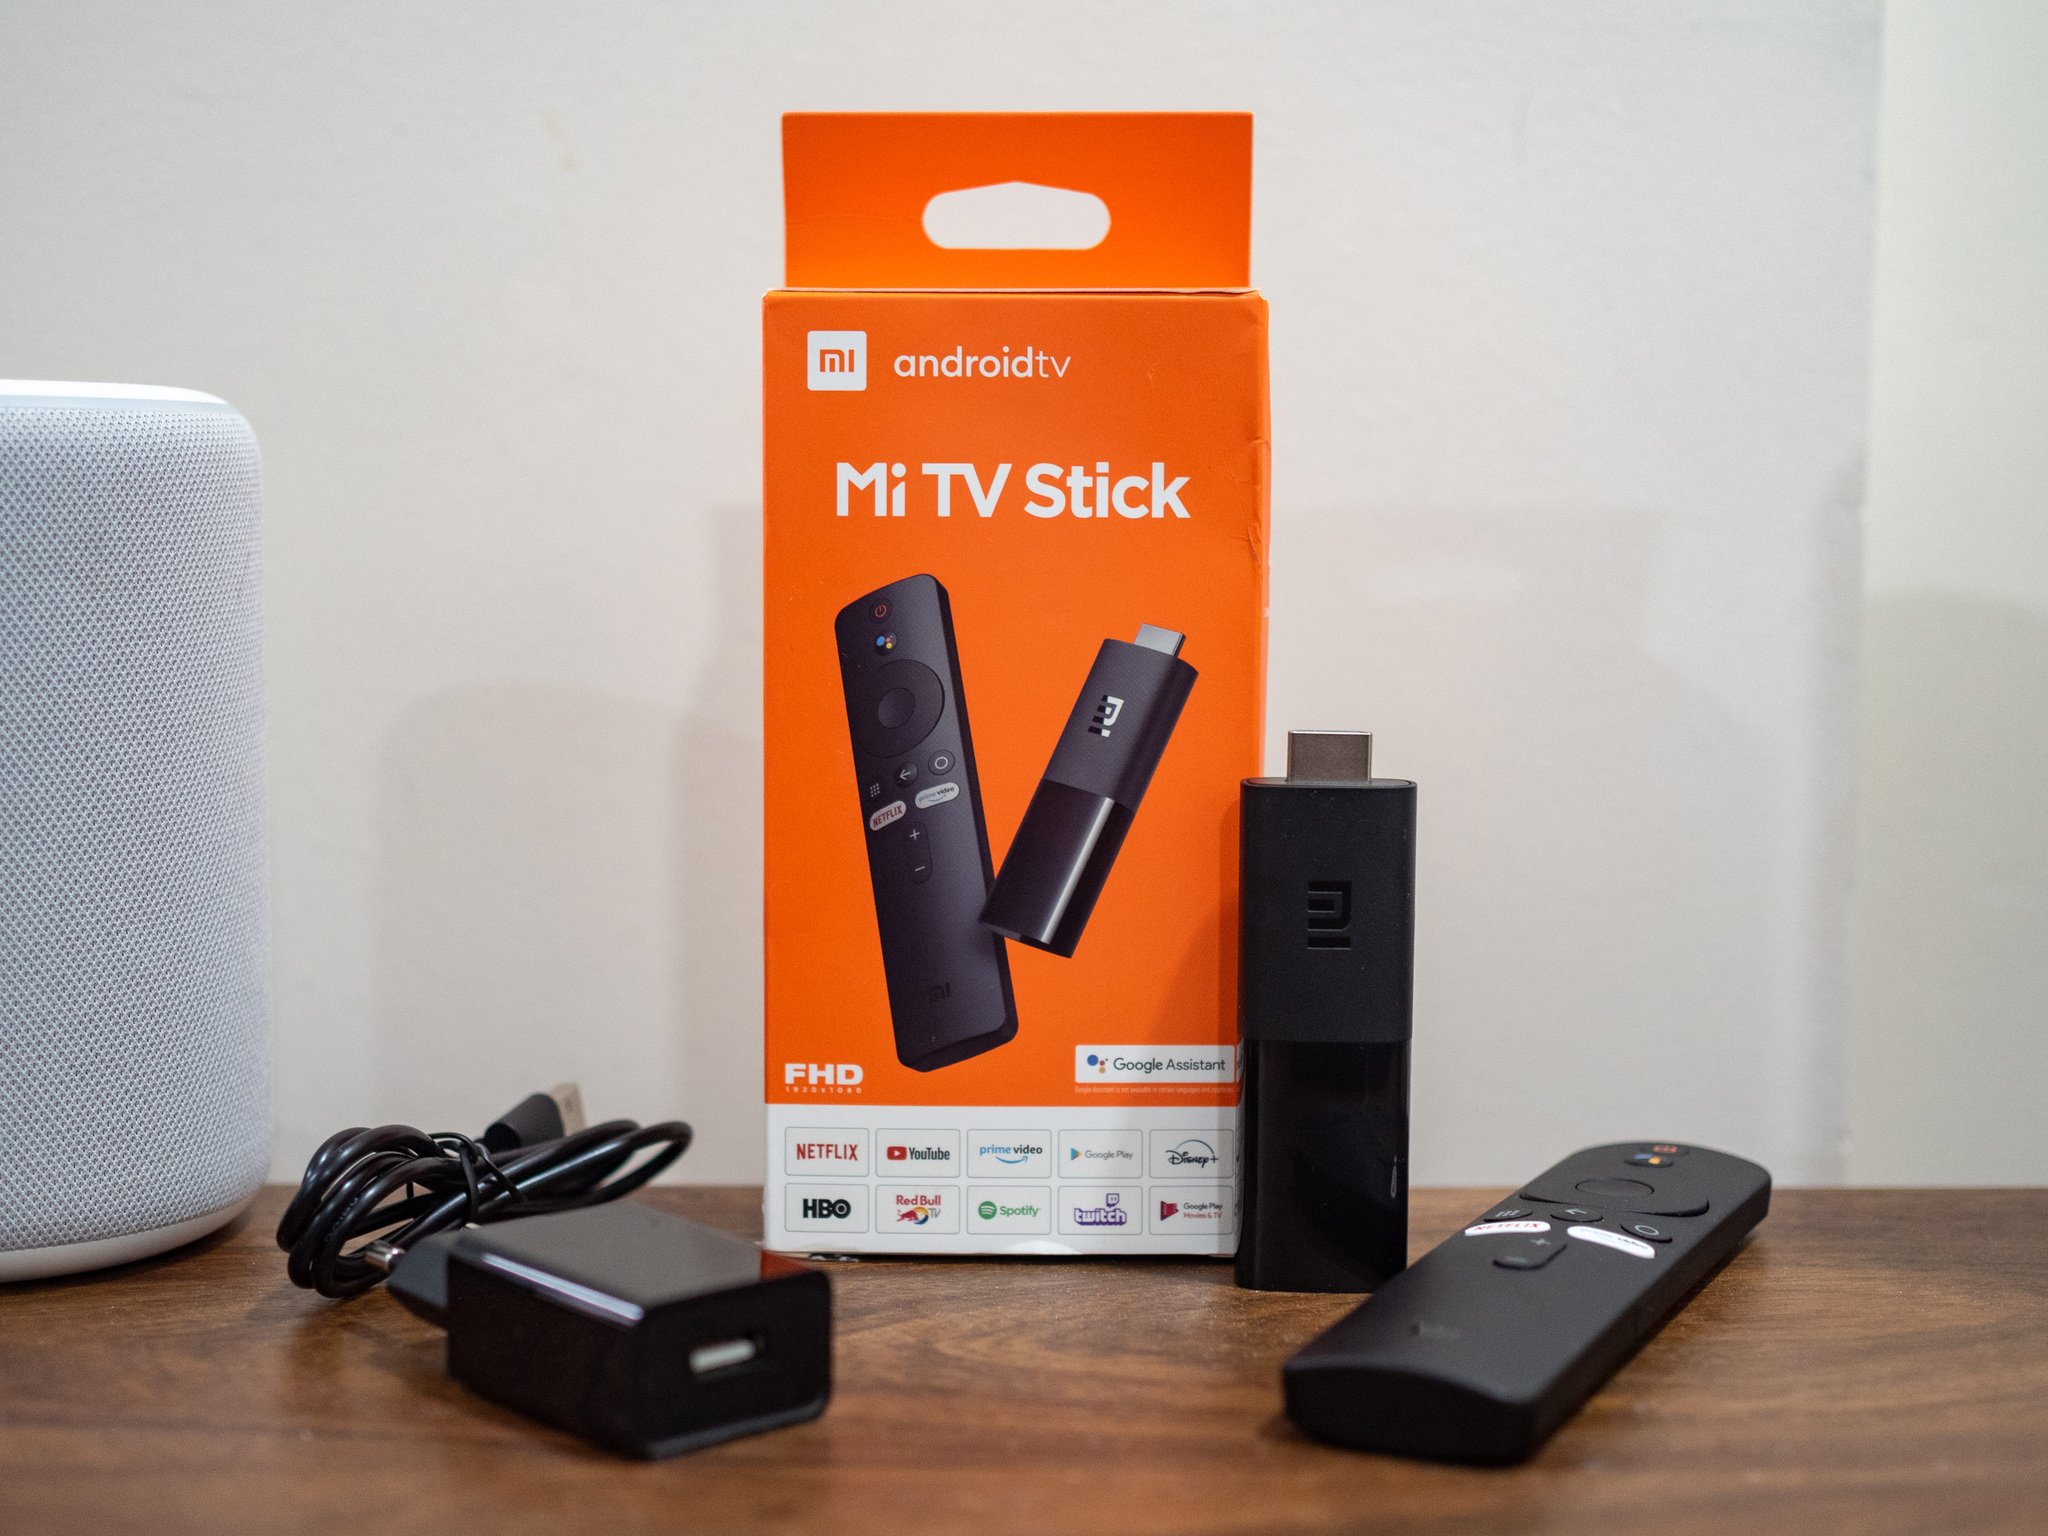 Xiaomi TV Stick 4K is Now Available in India